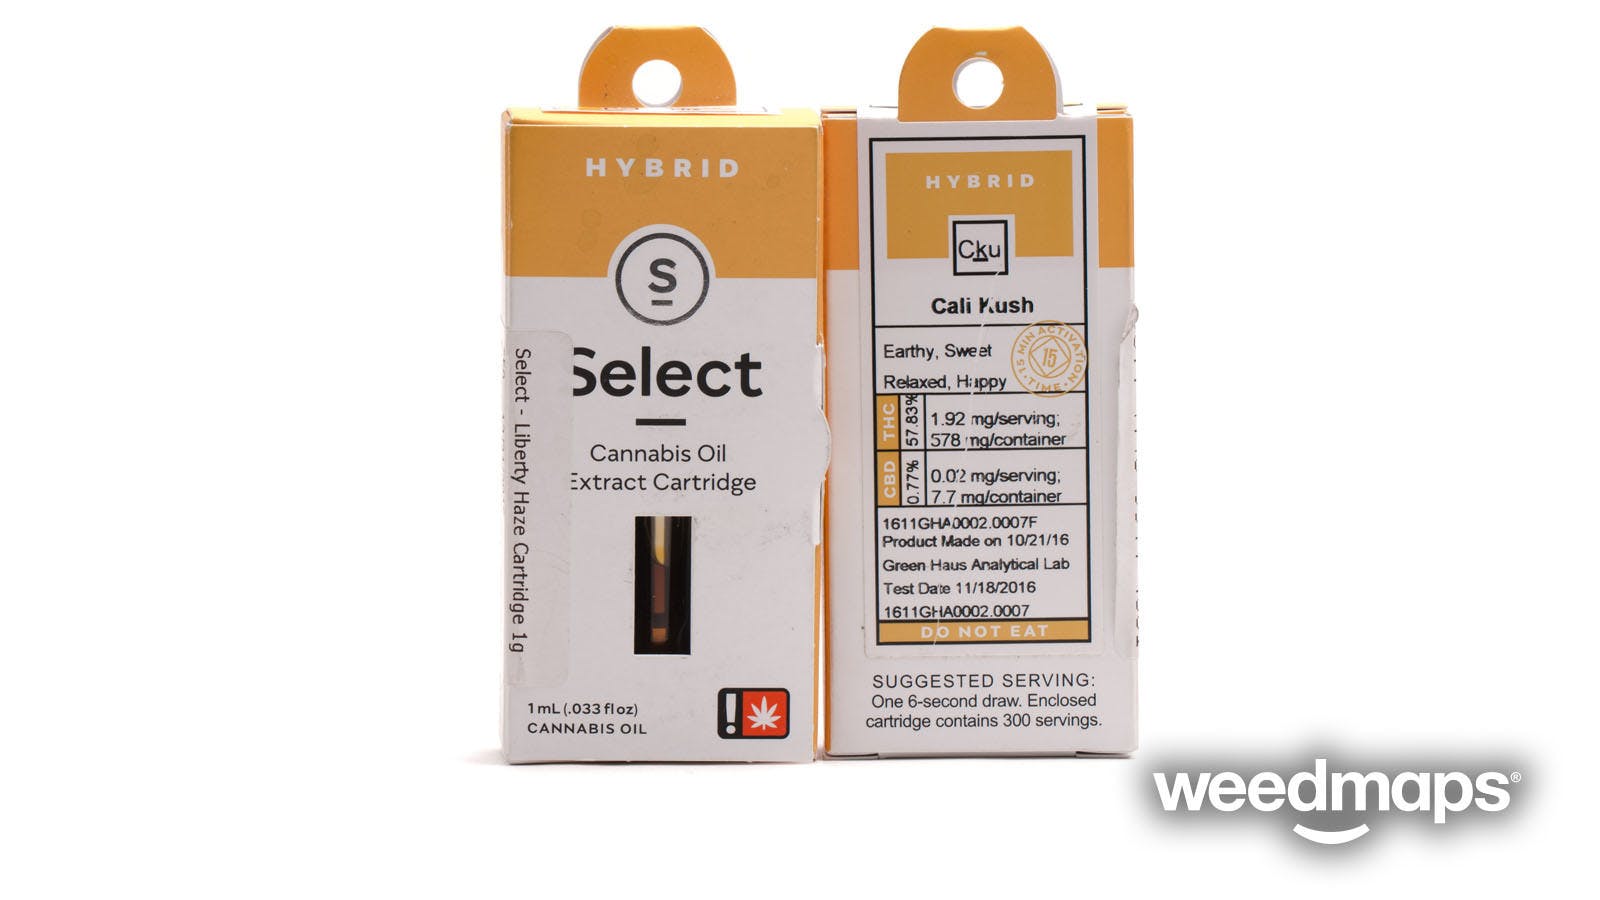 concentrate-co2-cali-kush-1g-cartridge-select-strains